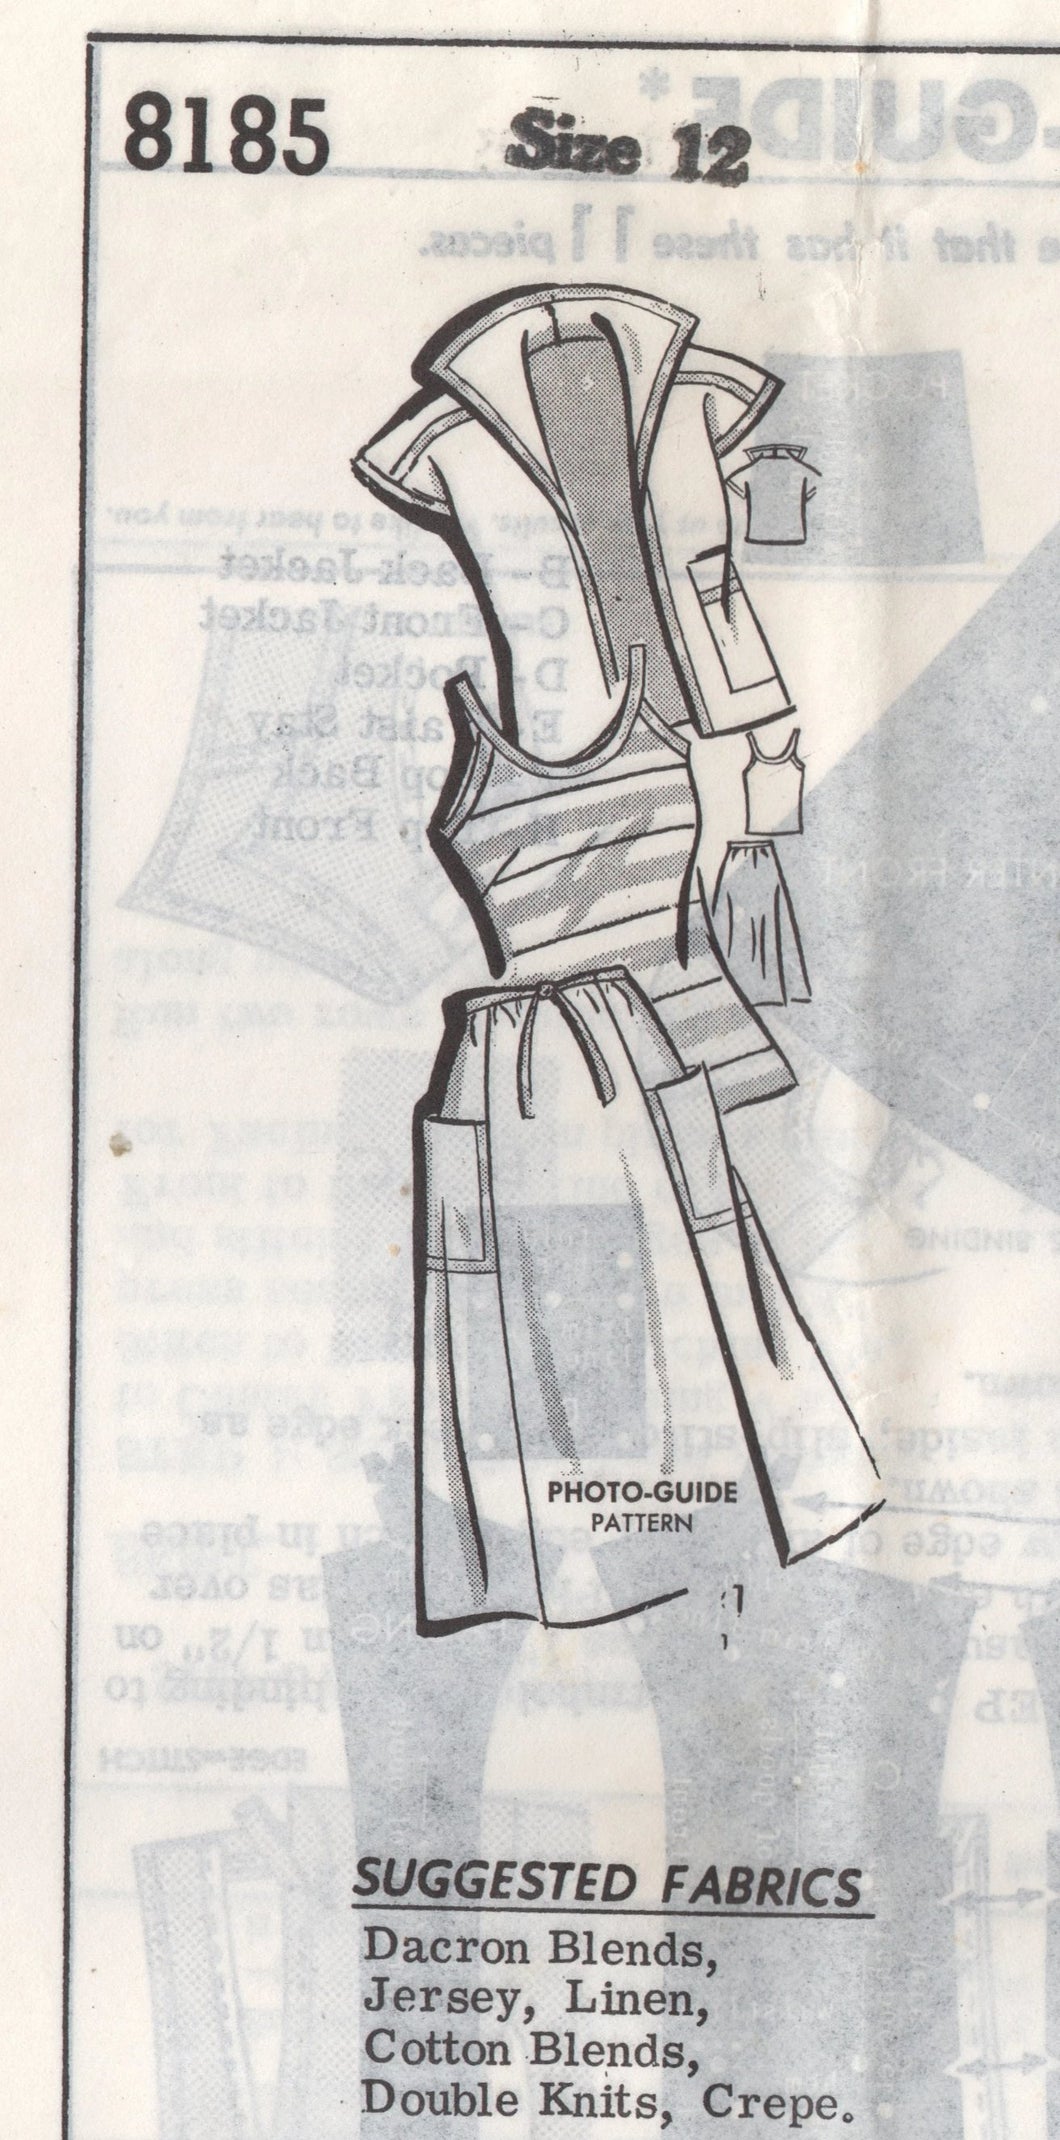 1960's Mail Order 3 Piece Outfit, Jacket, Top and Skirt Pattern - Bust 34